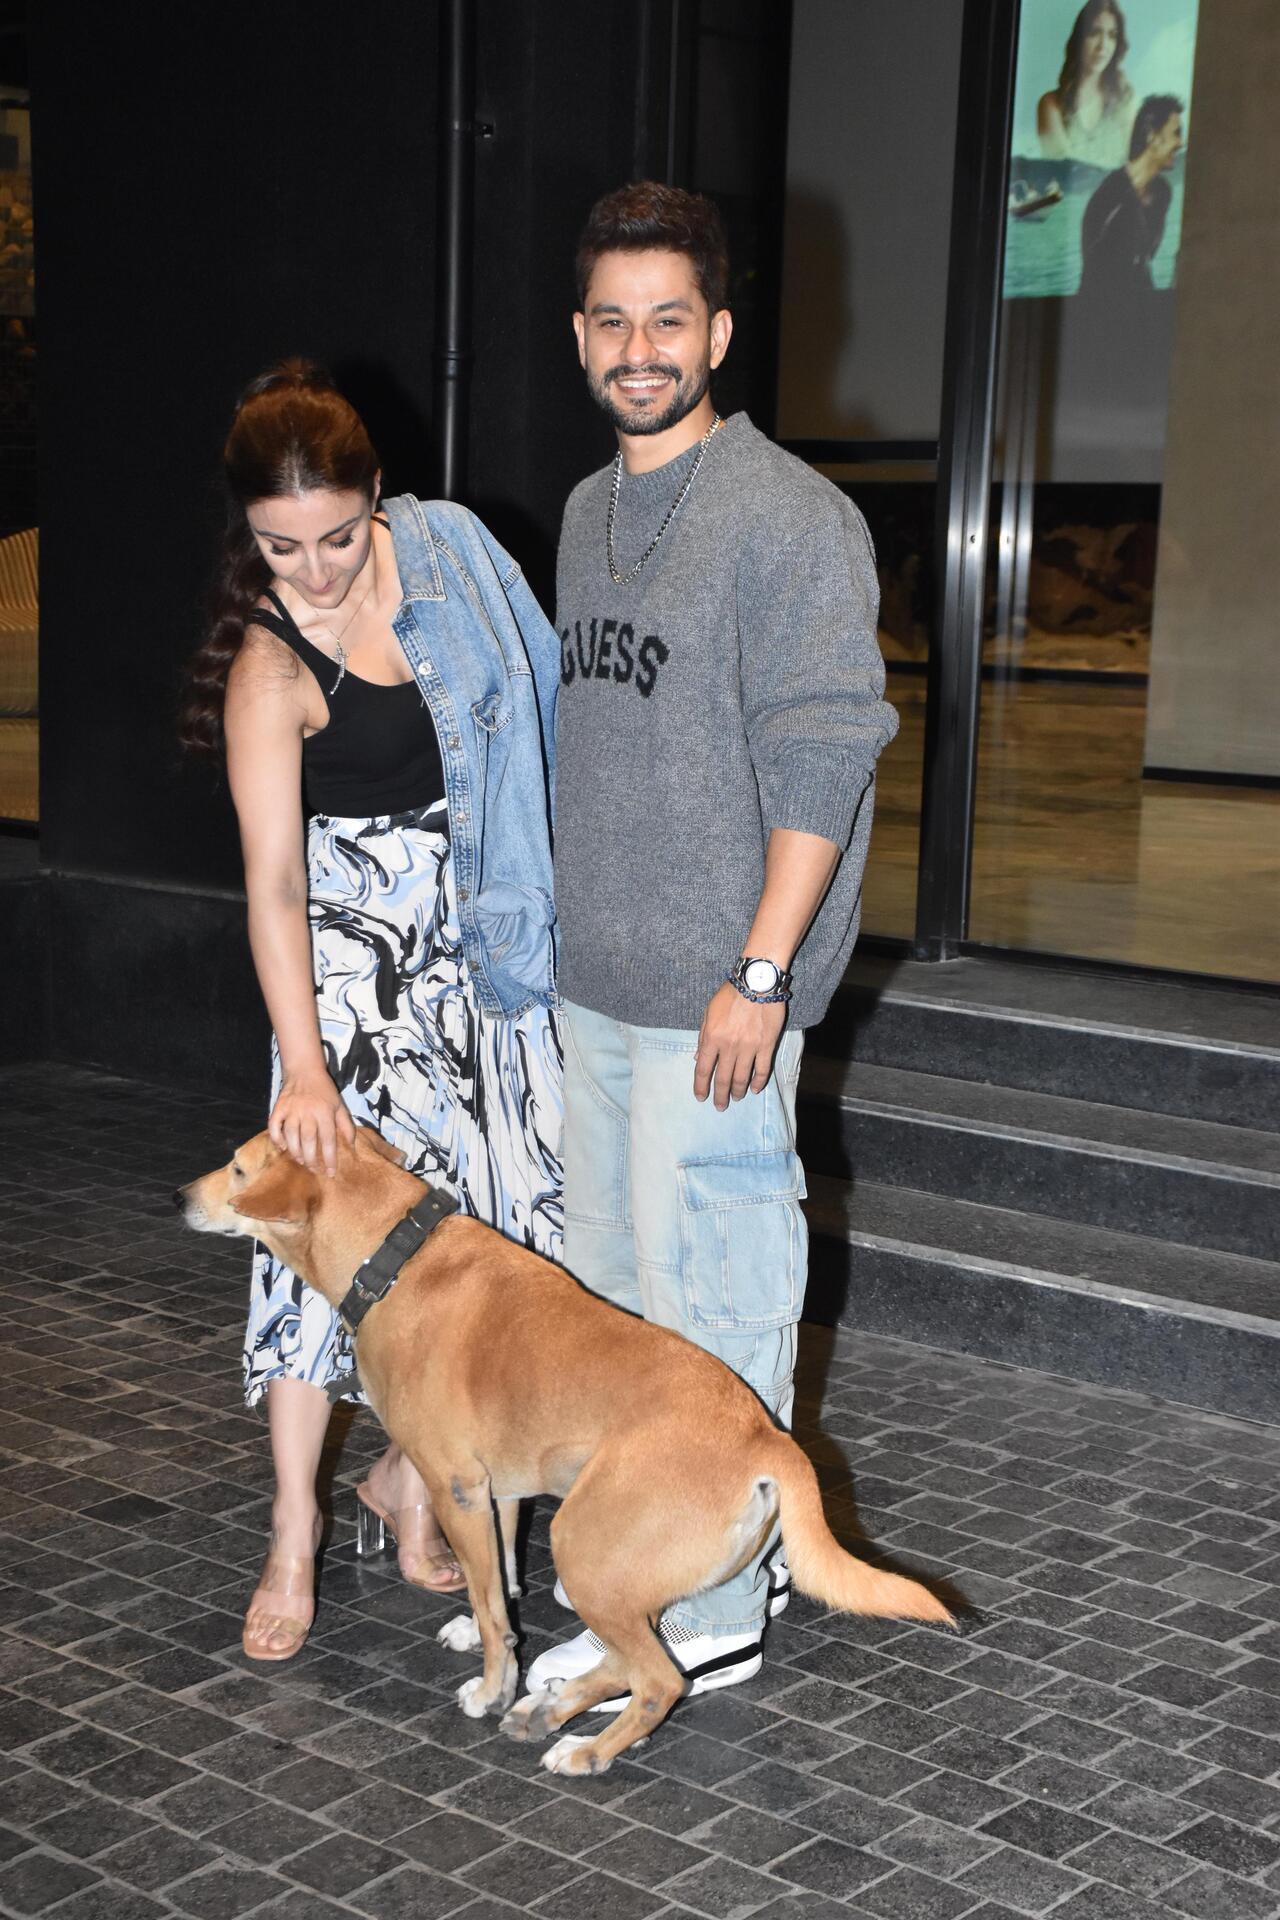 Kunal Kemmu arrived with his wife and actress Soha Ali Khan. A cute doggo photobombed their paparazzi moment. 